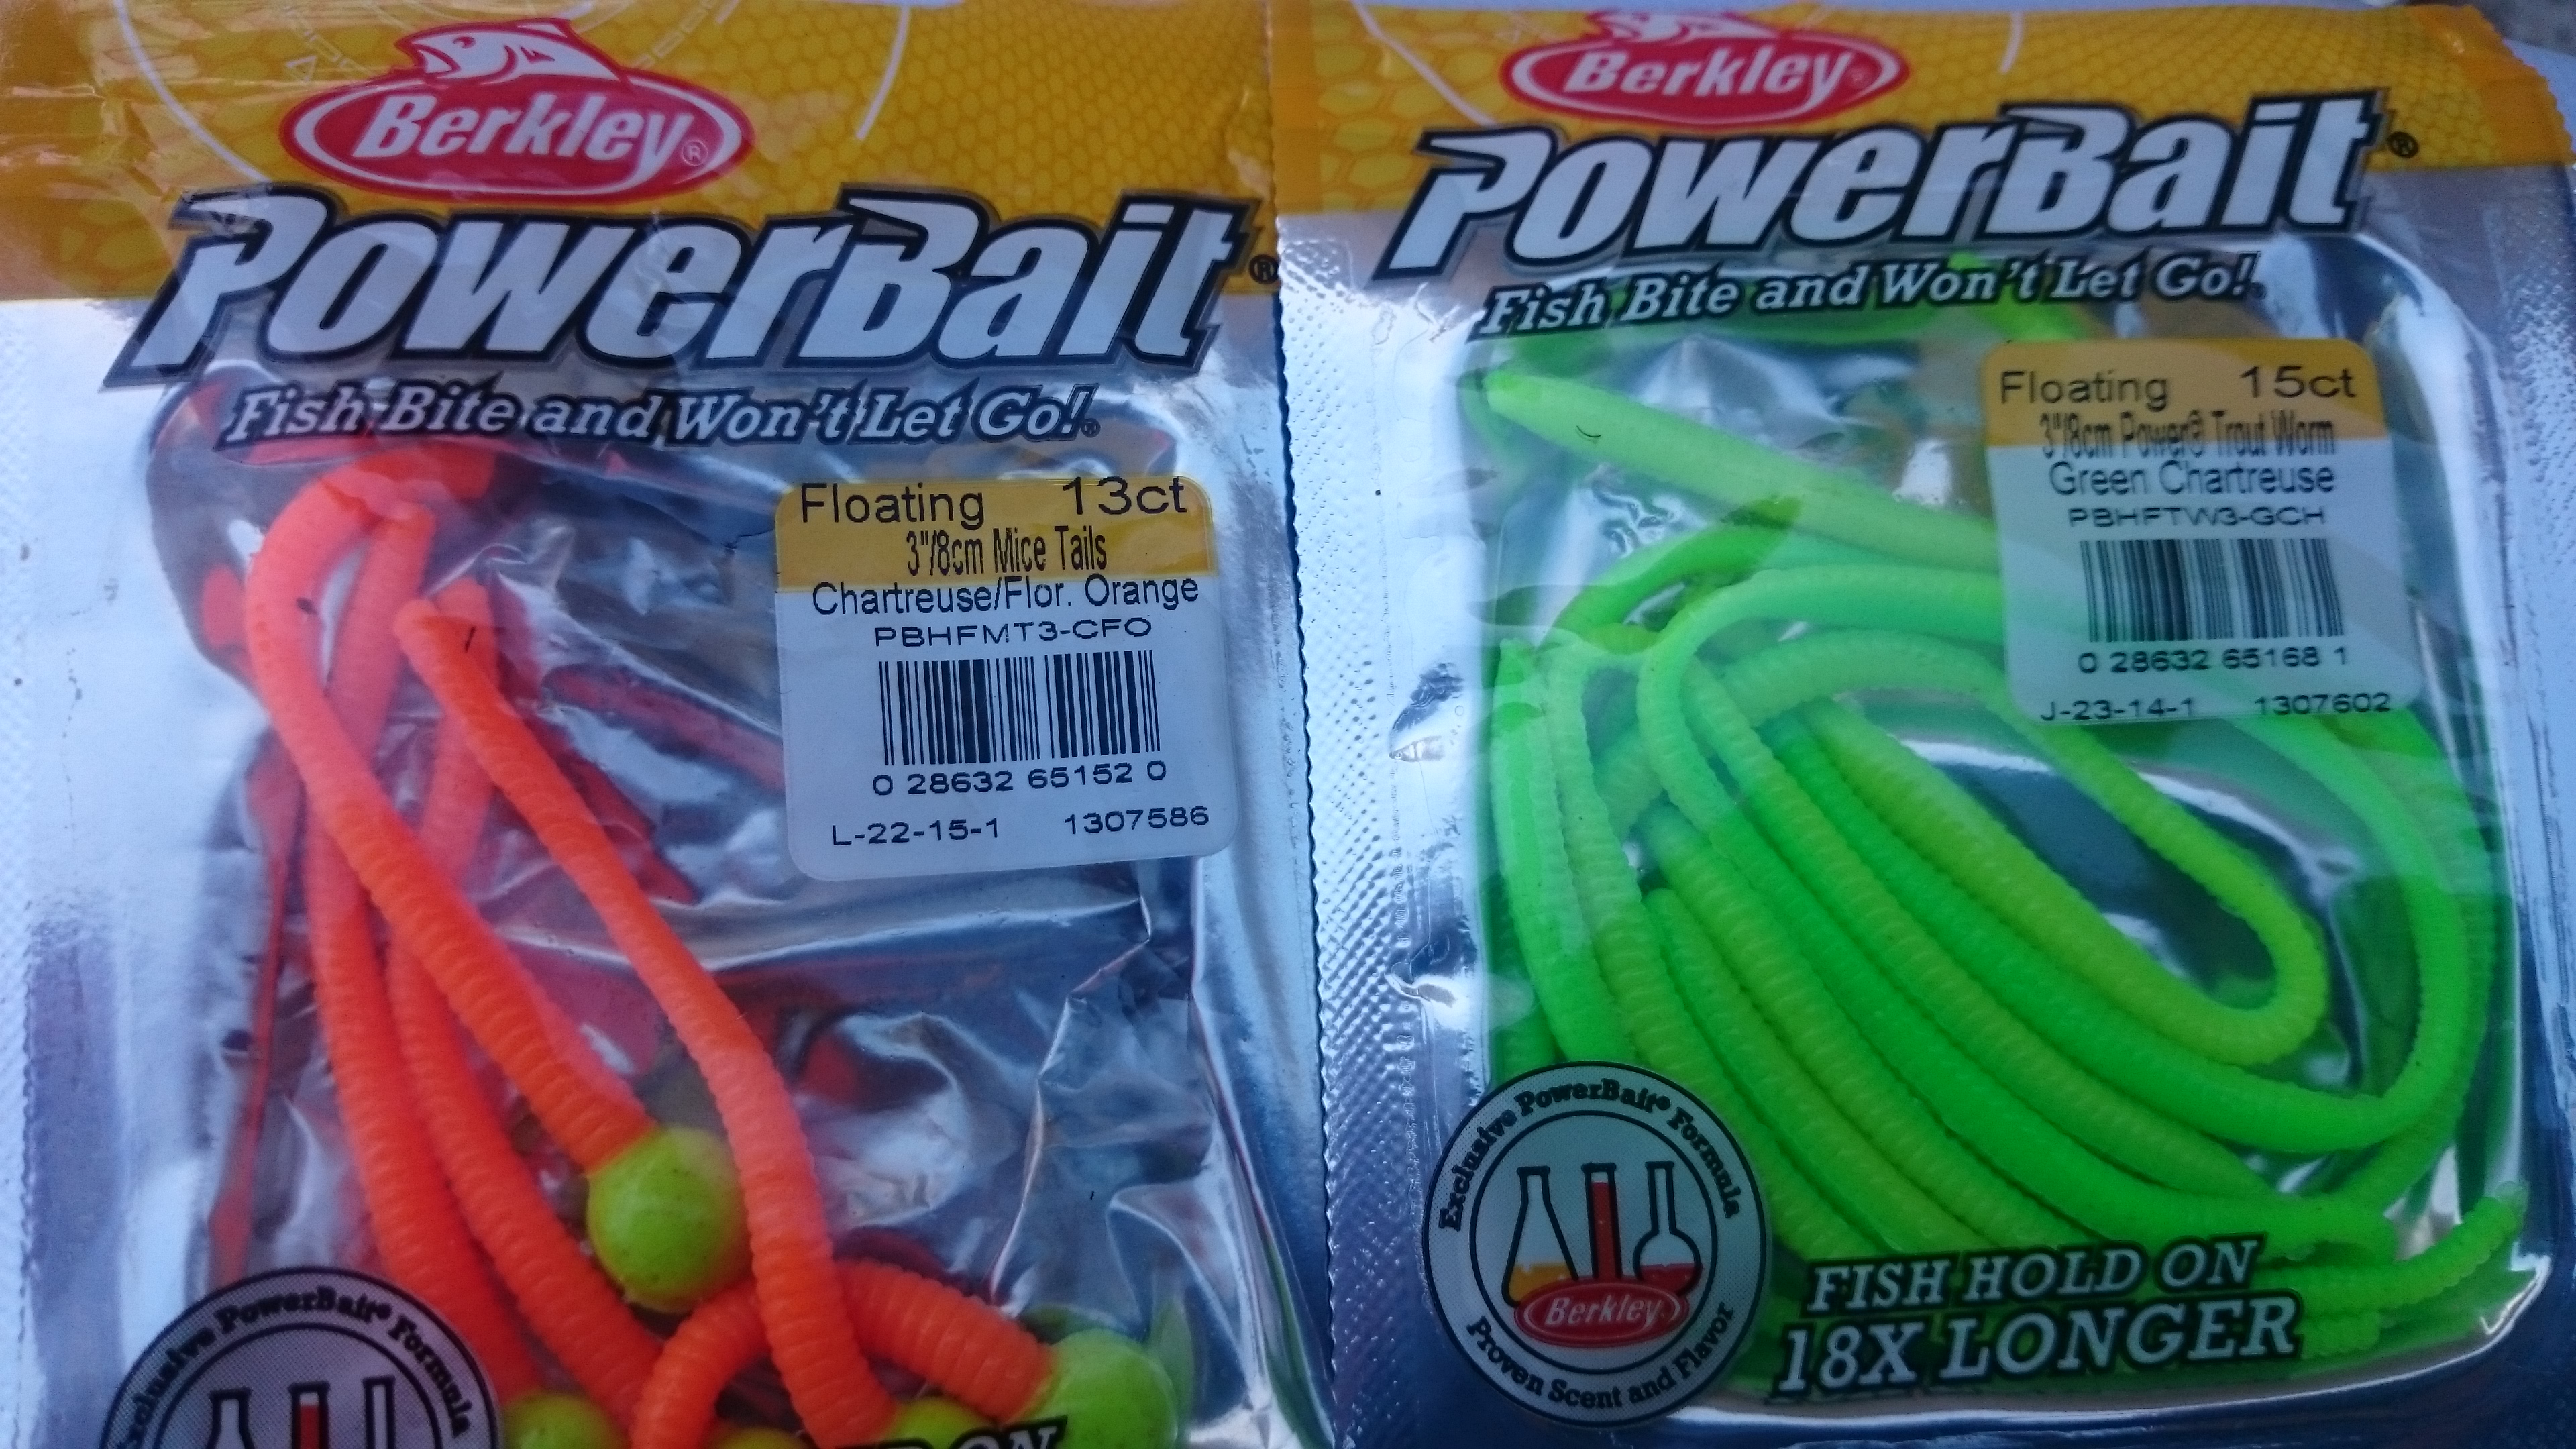 Berkley Powerbait Worms and Mice Tails for Trout Fishing